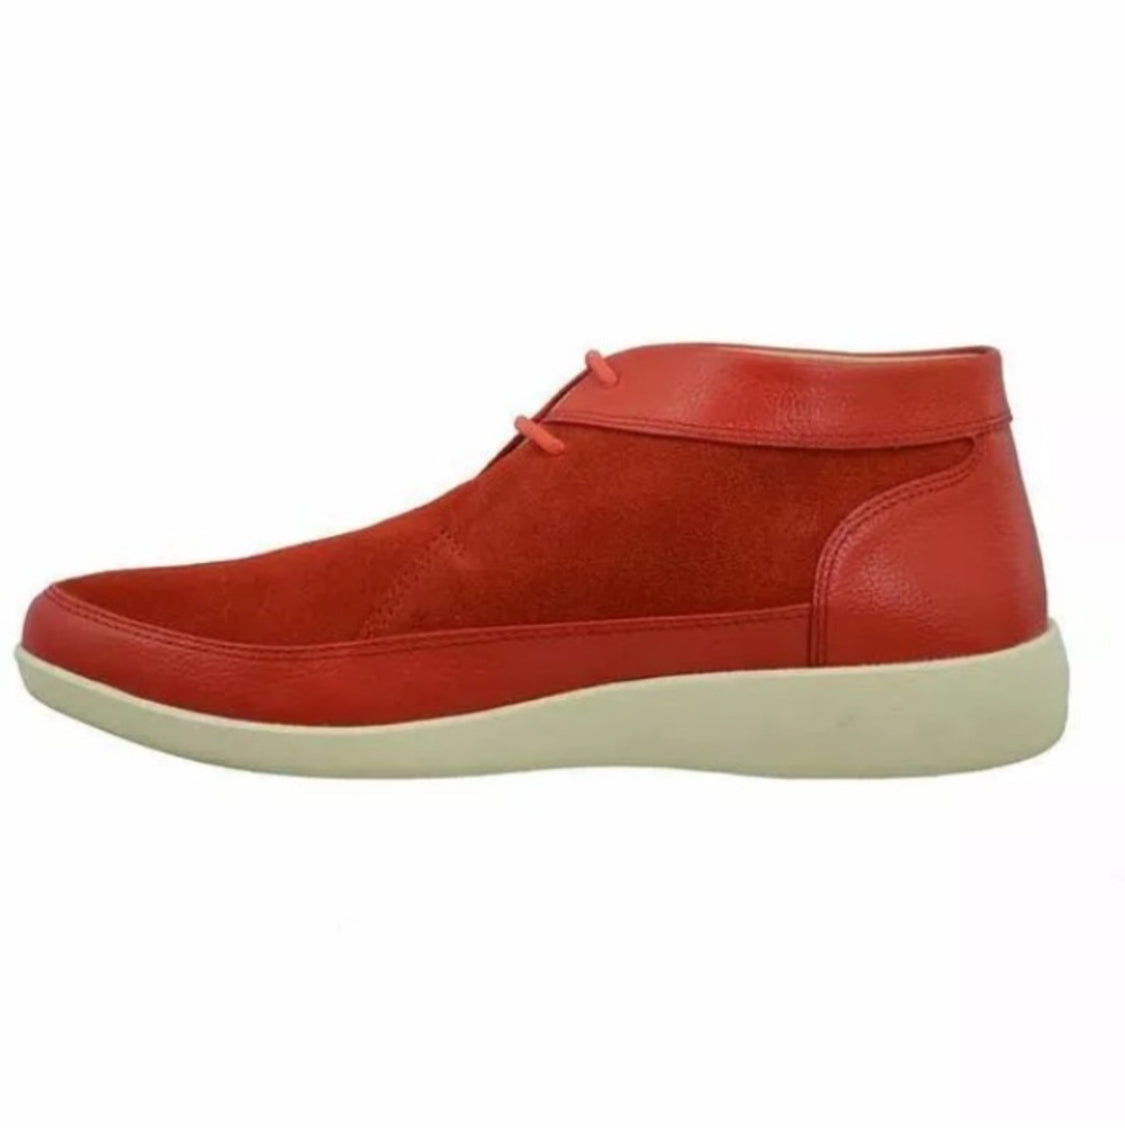  Comfortable and Durable Men's Red High Top Sneakers by Johnny Famous